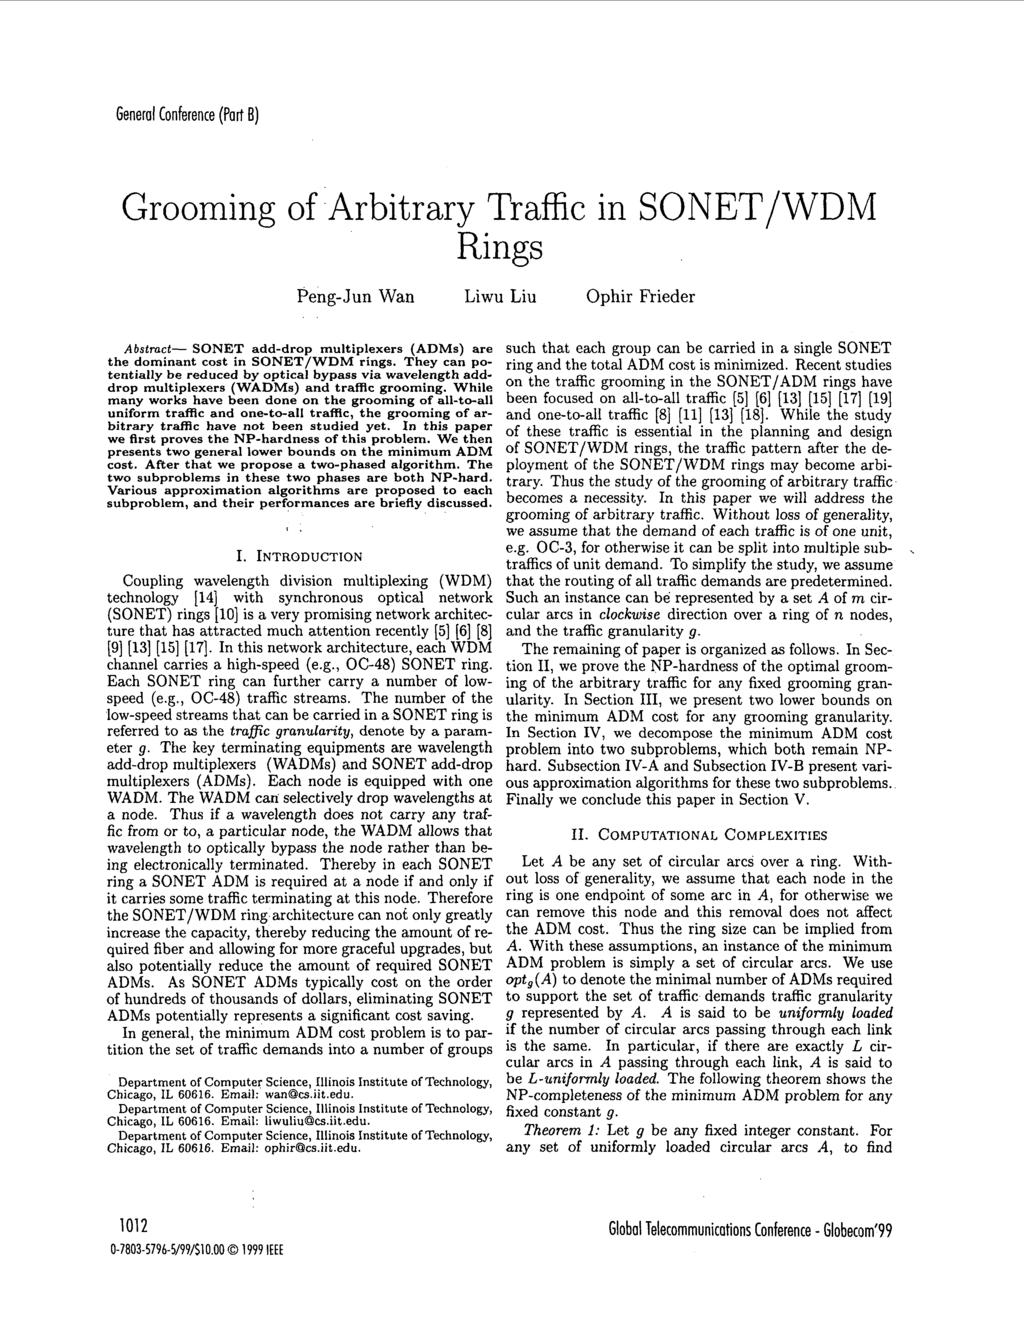 General Conference (Part E) Grooming of Arbitrary Traffic in SONET/WDM Rings Peng-Jun Wan Liwu Liu Ophir Frieder Abstract- SONET add-drop multiplexers (ADMs) are the dominant cost in SONET/WDM rings.